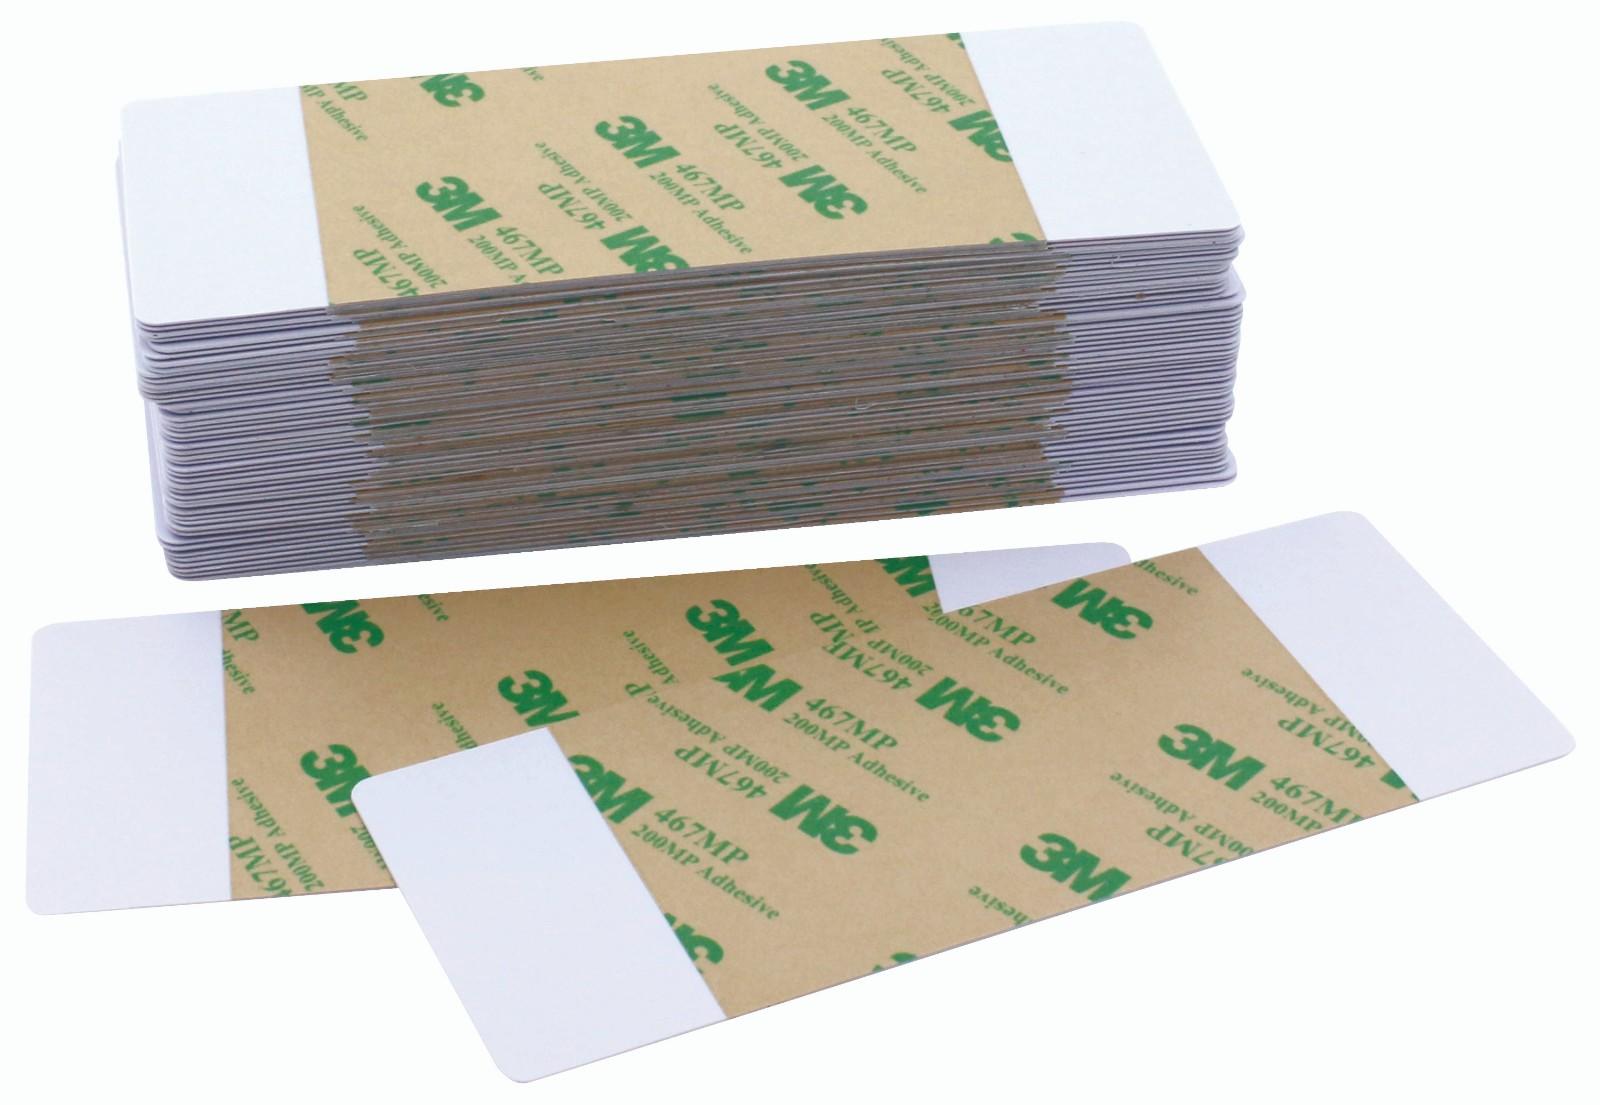 cost effective fargo cleaning kit PVC manufacturer for Fargo card printers